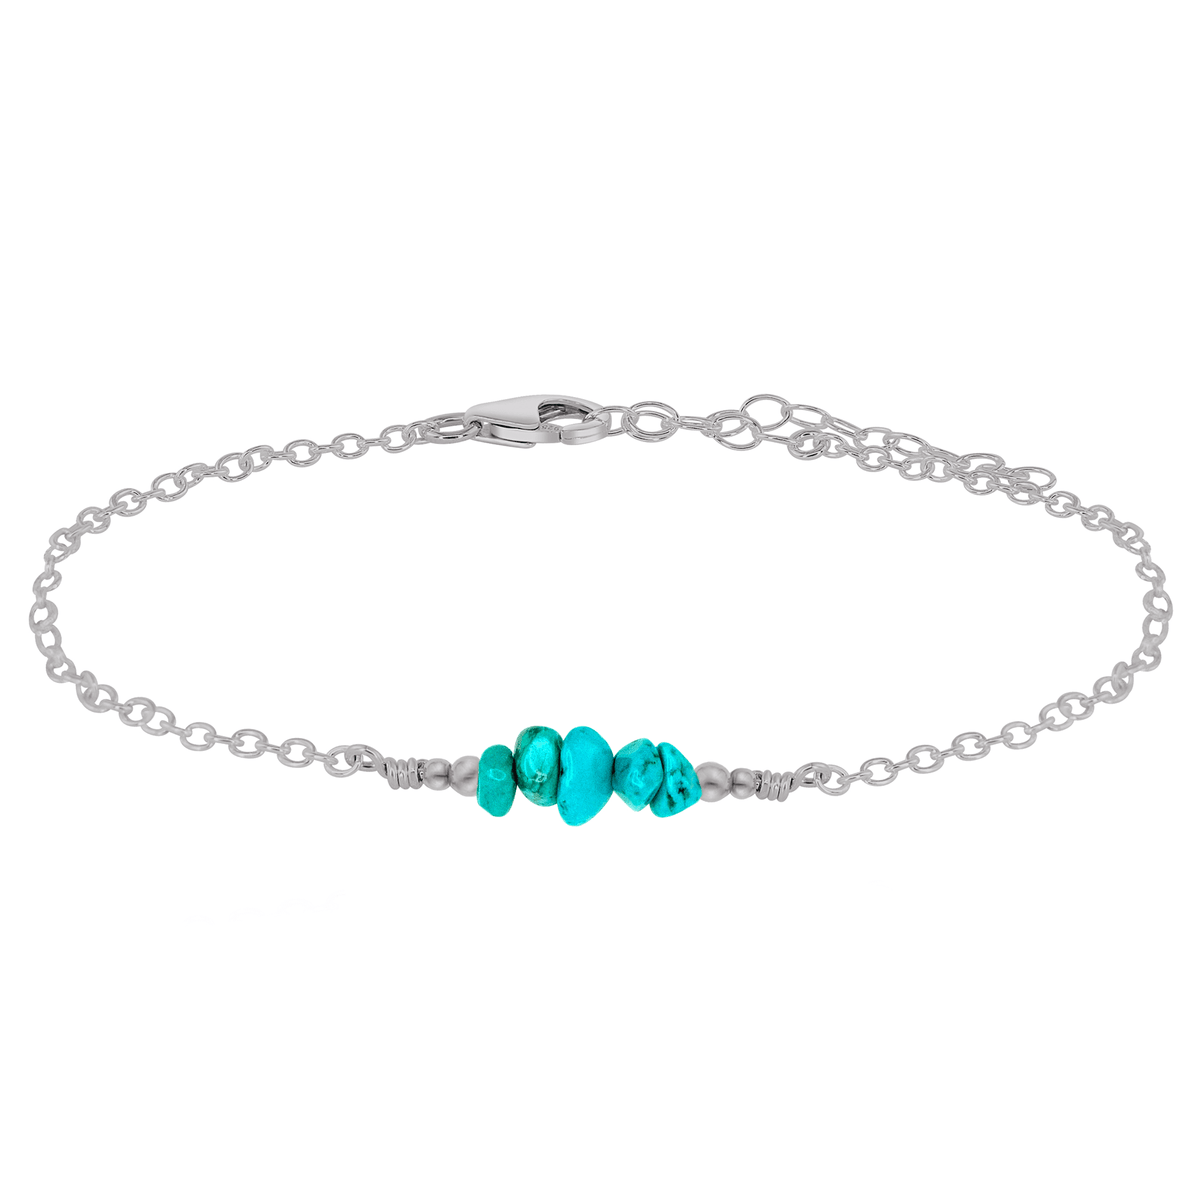 Chip Bead Bar Anklet - Turquoise - Stainless Steel - Luna Tide Handmade Jewellery